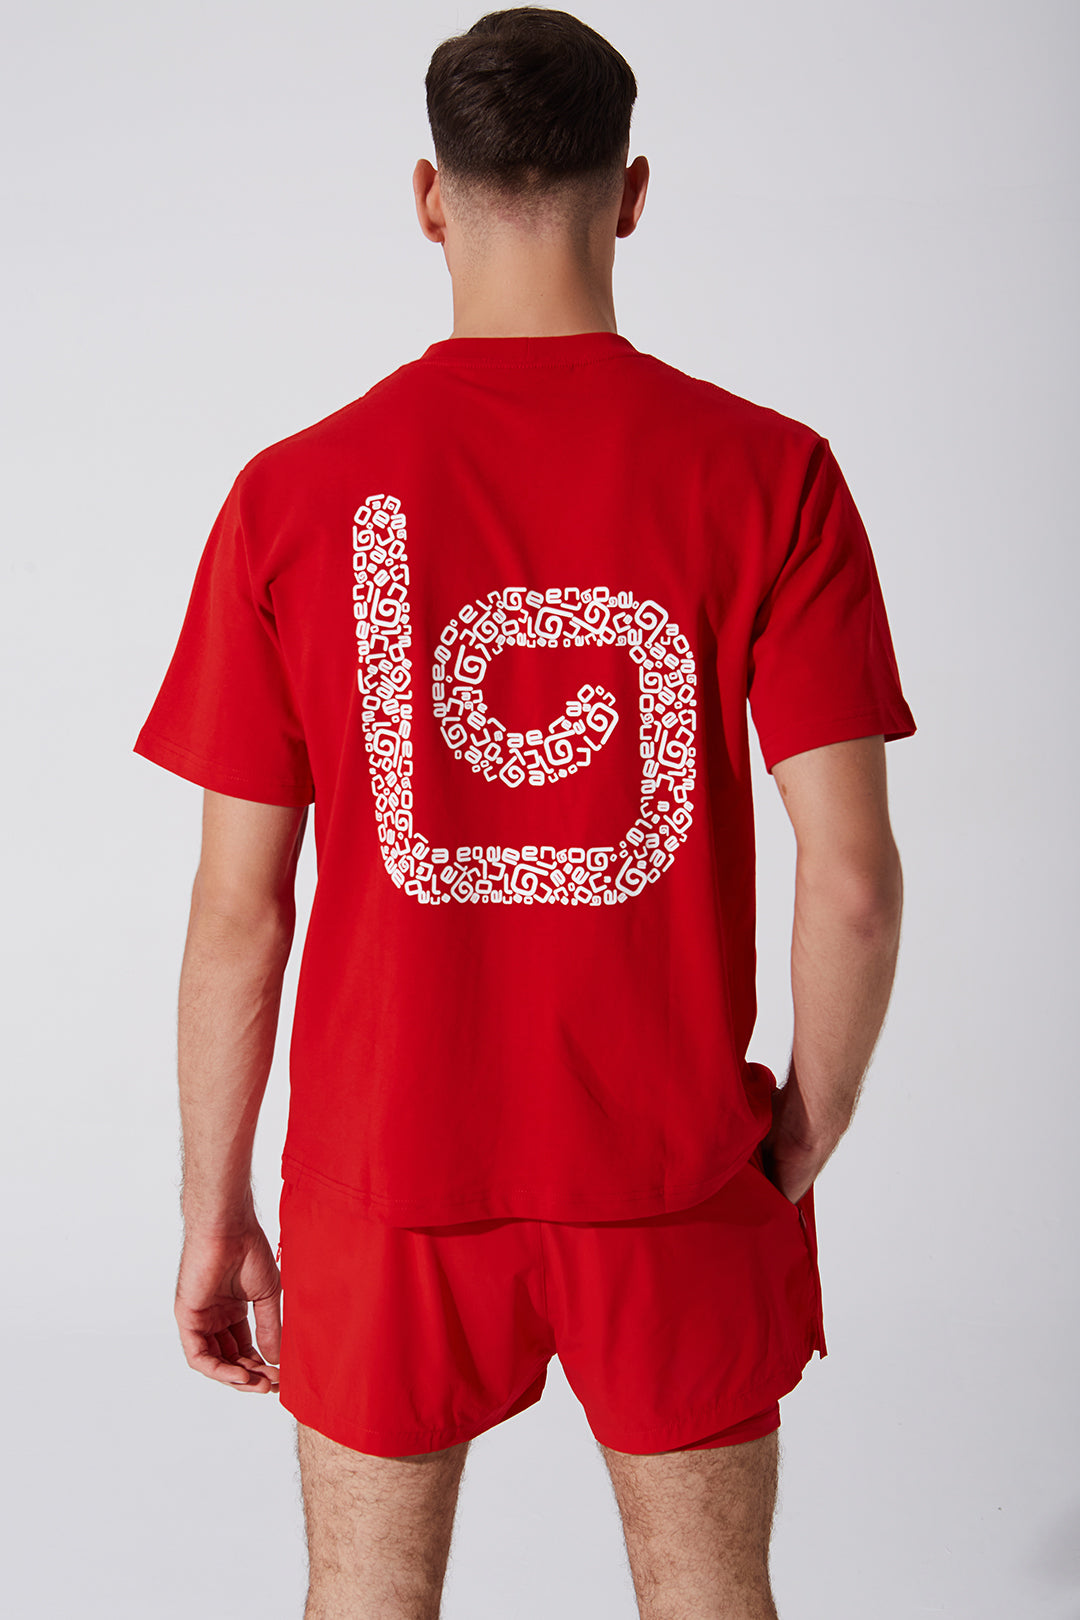 Unisex red short sleeve tee for men - limited edition - OW-0174-MSS-RD_3.jpg